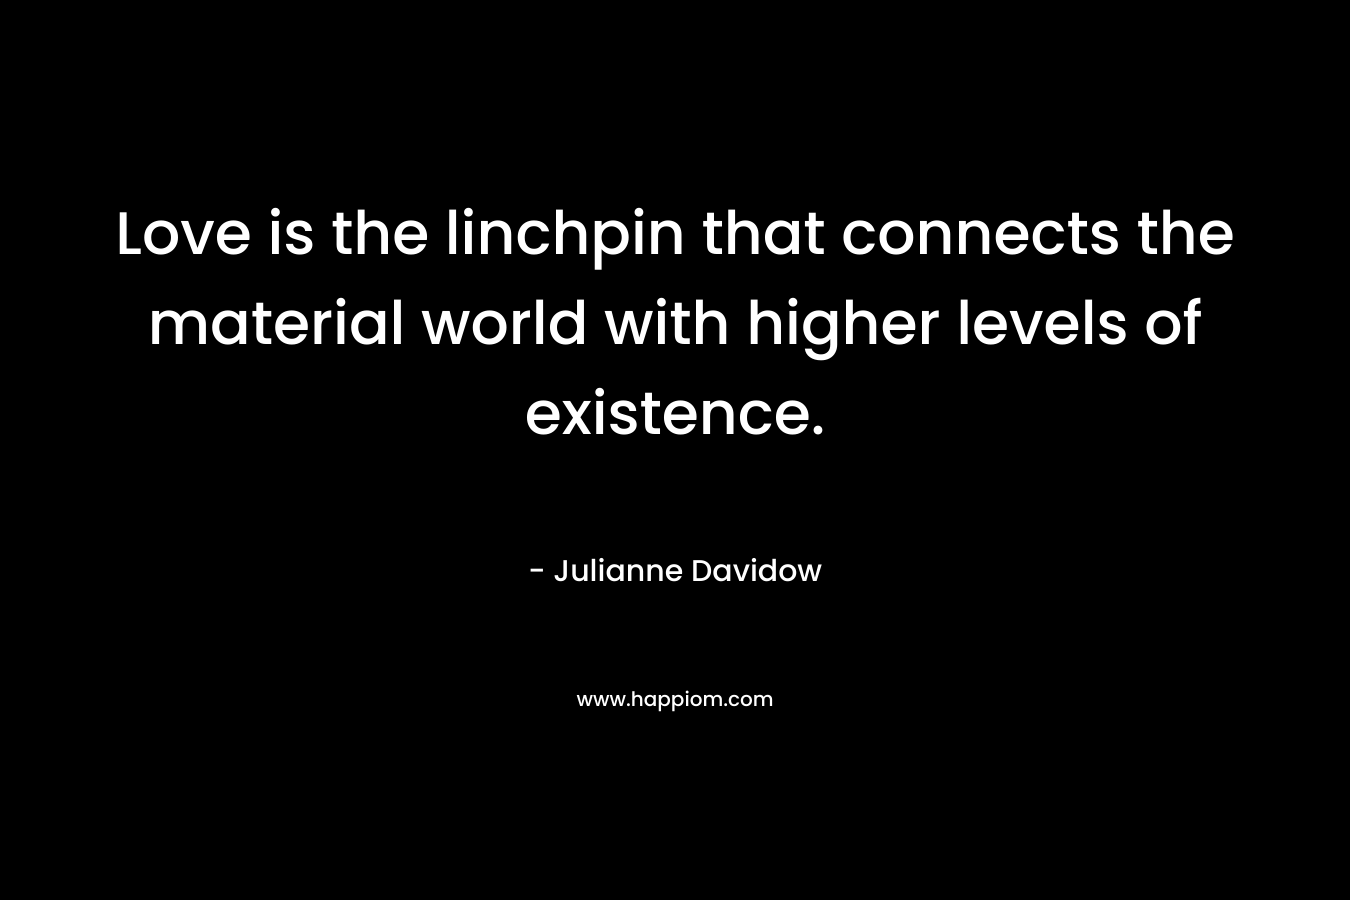 Love is the linchpin that connects the material world with higher levels of existence. – Julianne Davidow